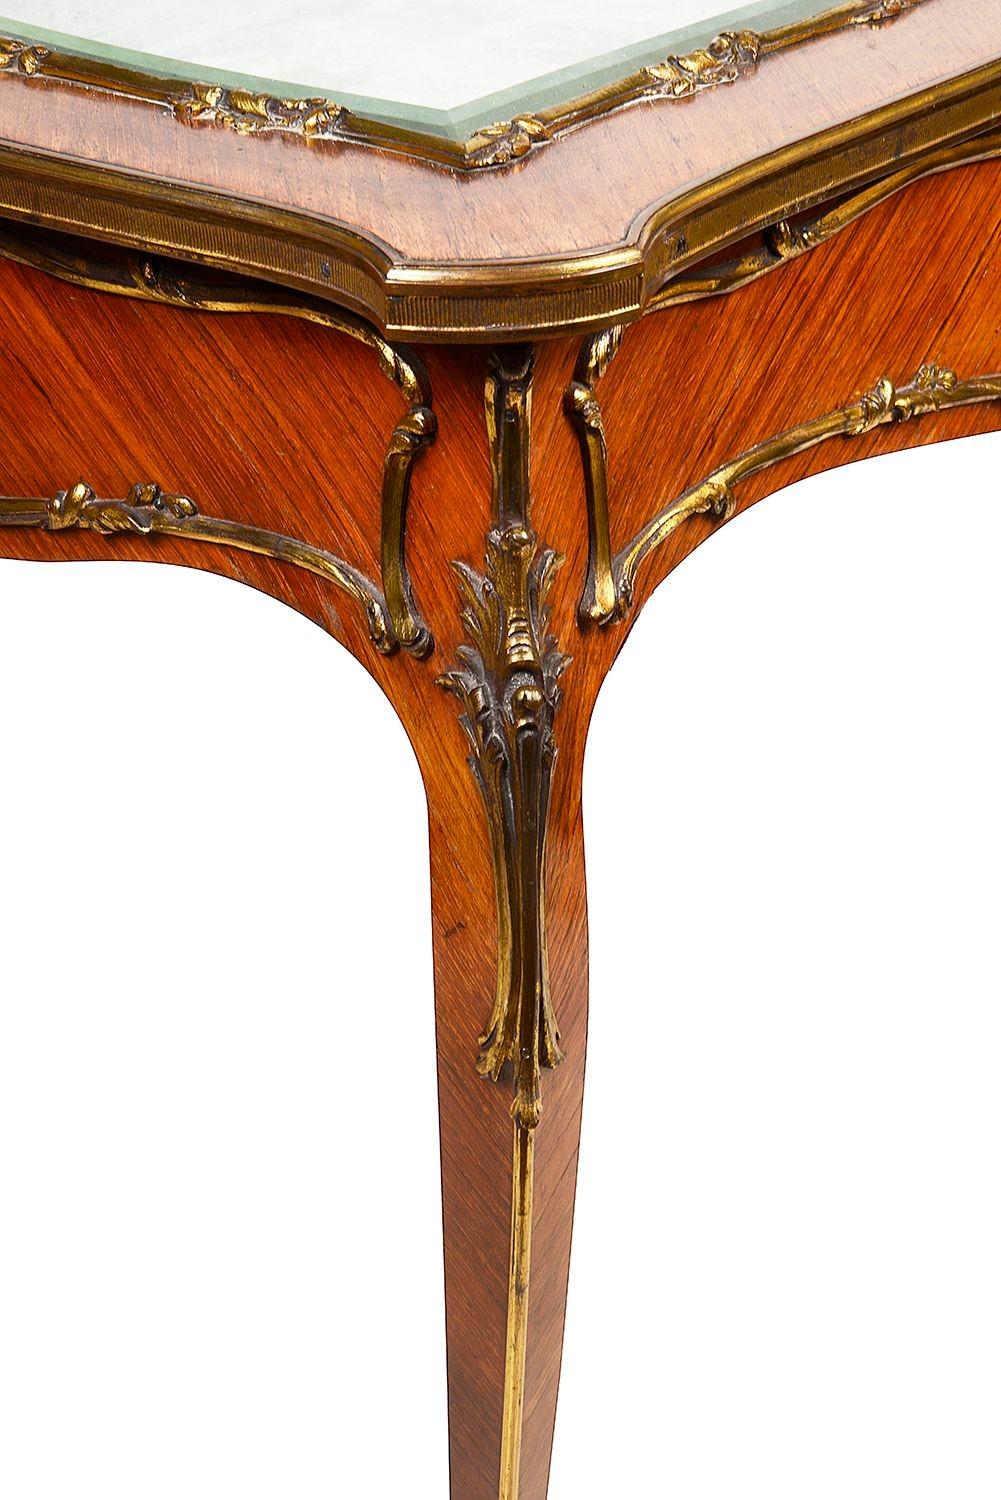 French Kingwood Bijouterie Table, 19th Century For Sale 2